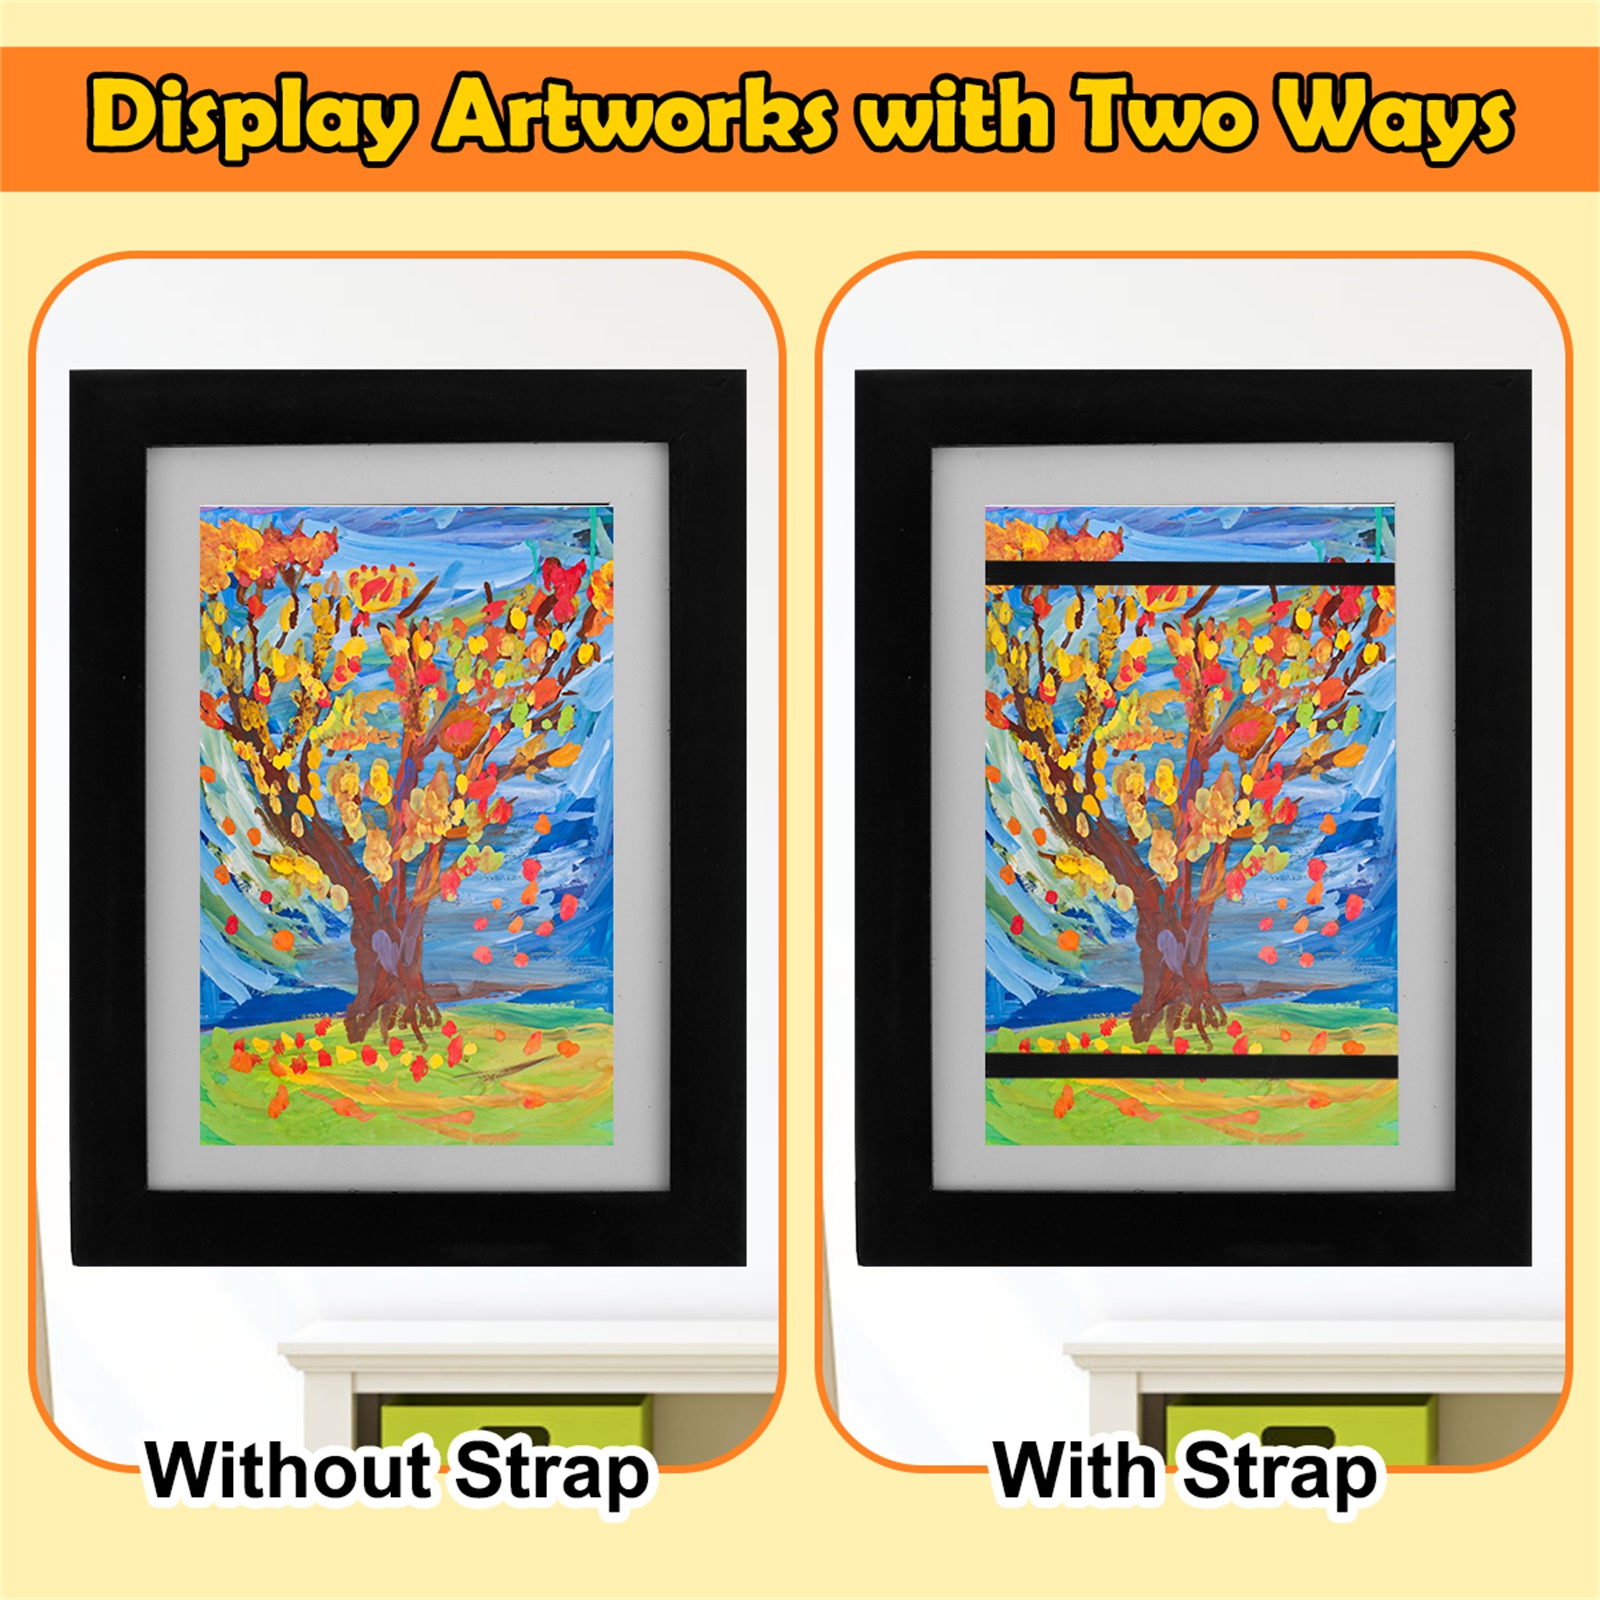 Jokapy Kids Art Picture Frames Changeable Artwork Display Frames with Stand, 9 inch x 13 inch, Black, 2 Pack, Size: 9.4 x 13